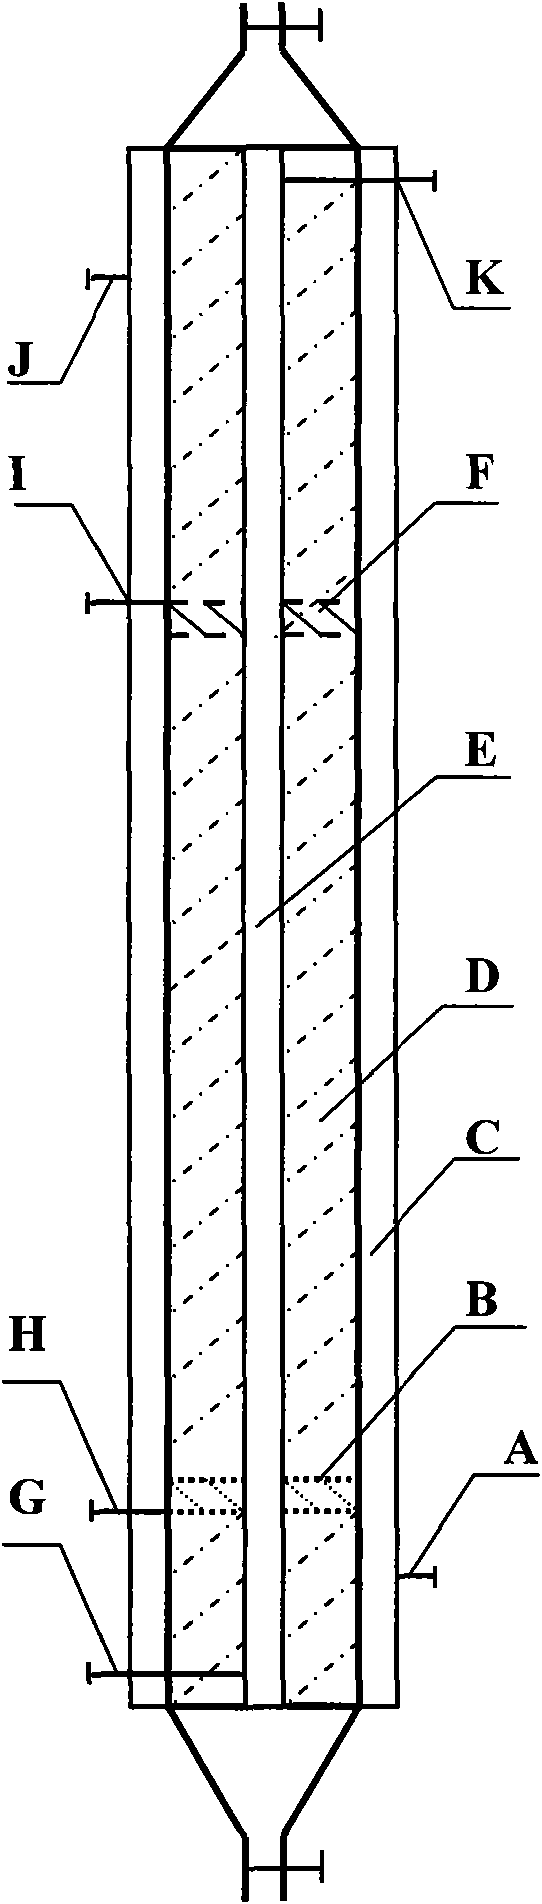 Reactor for preparing tetrabromoethane by addition reaction of bromine and acetylene and synthesis process